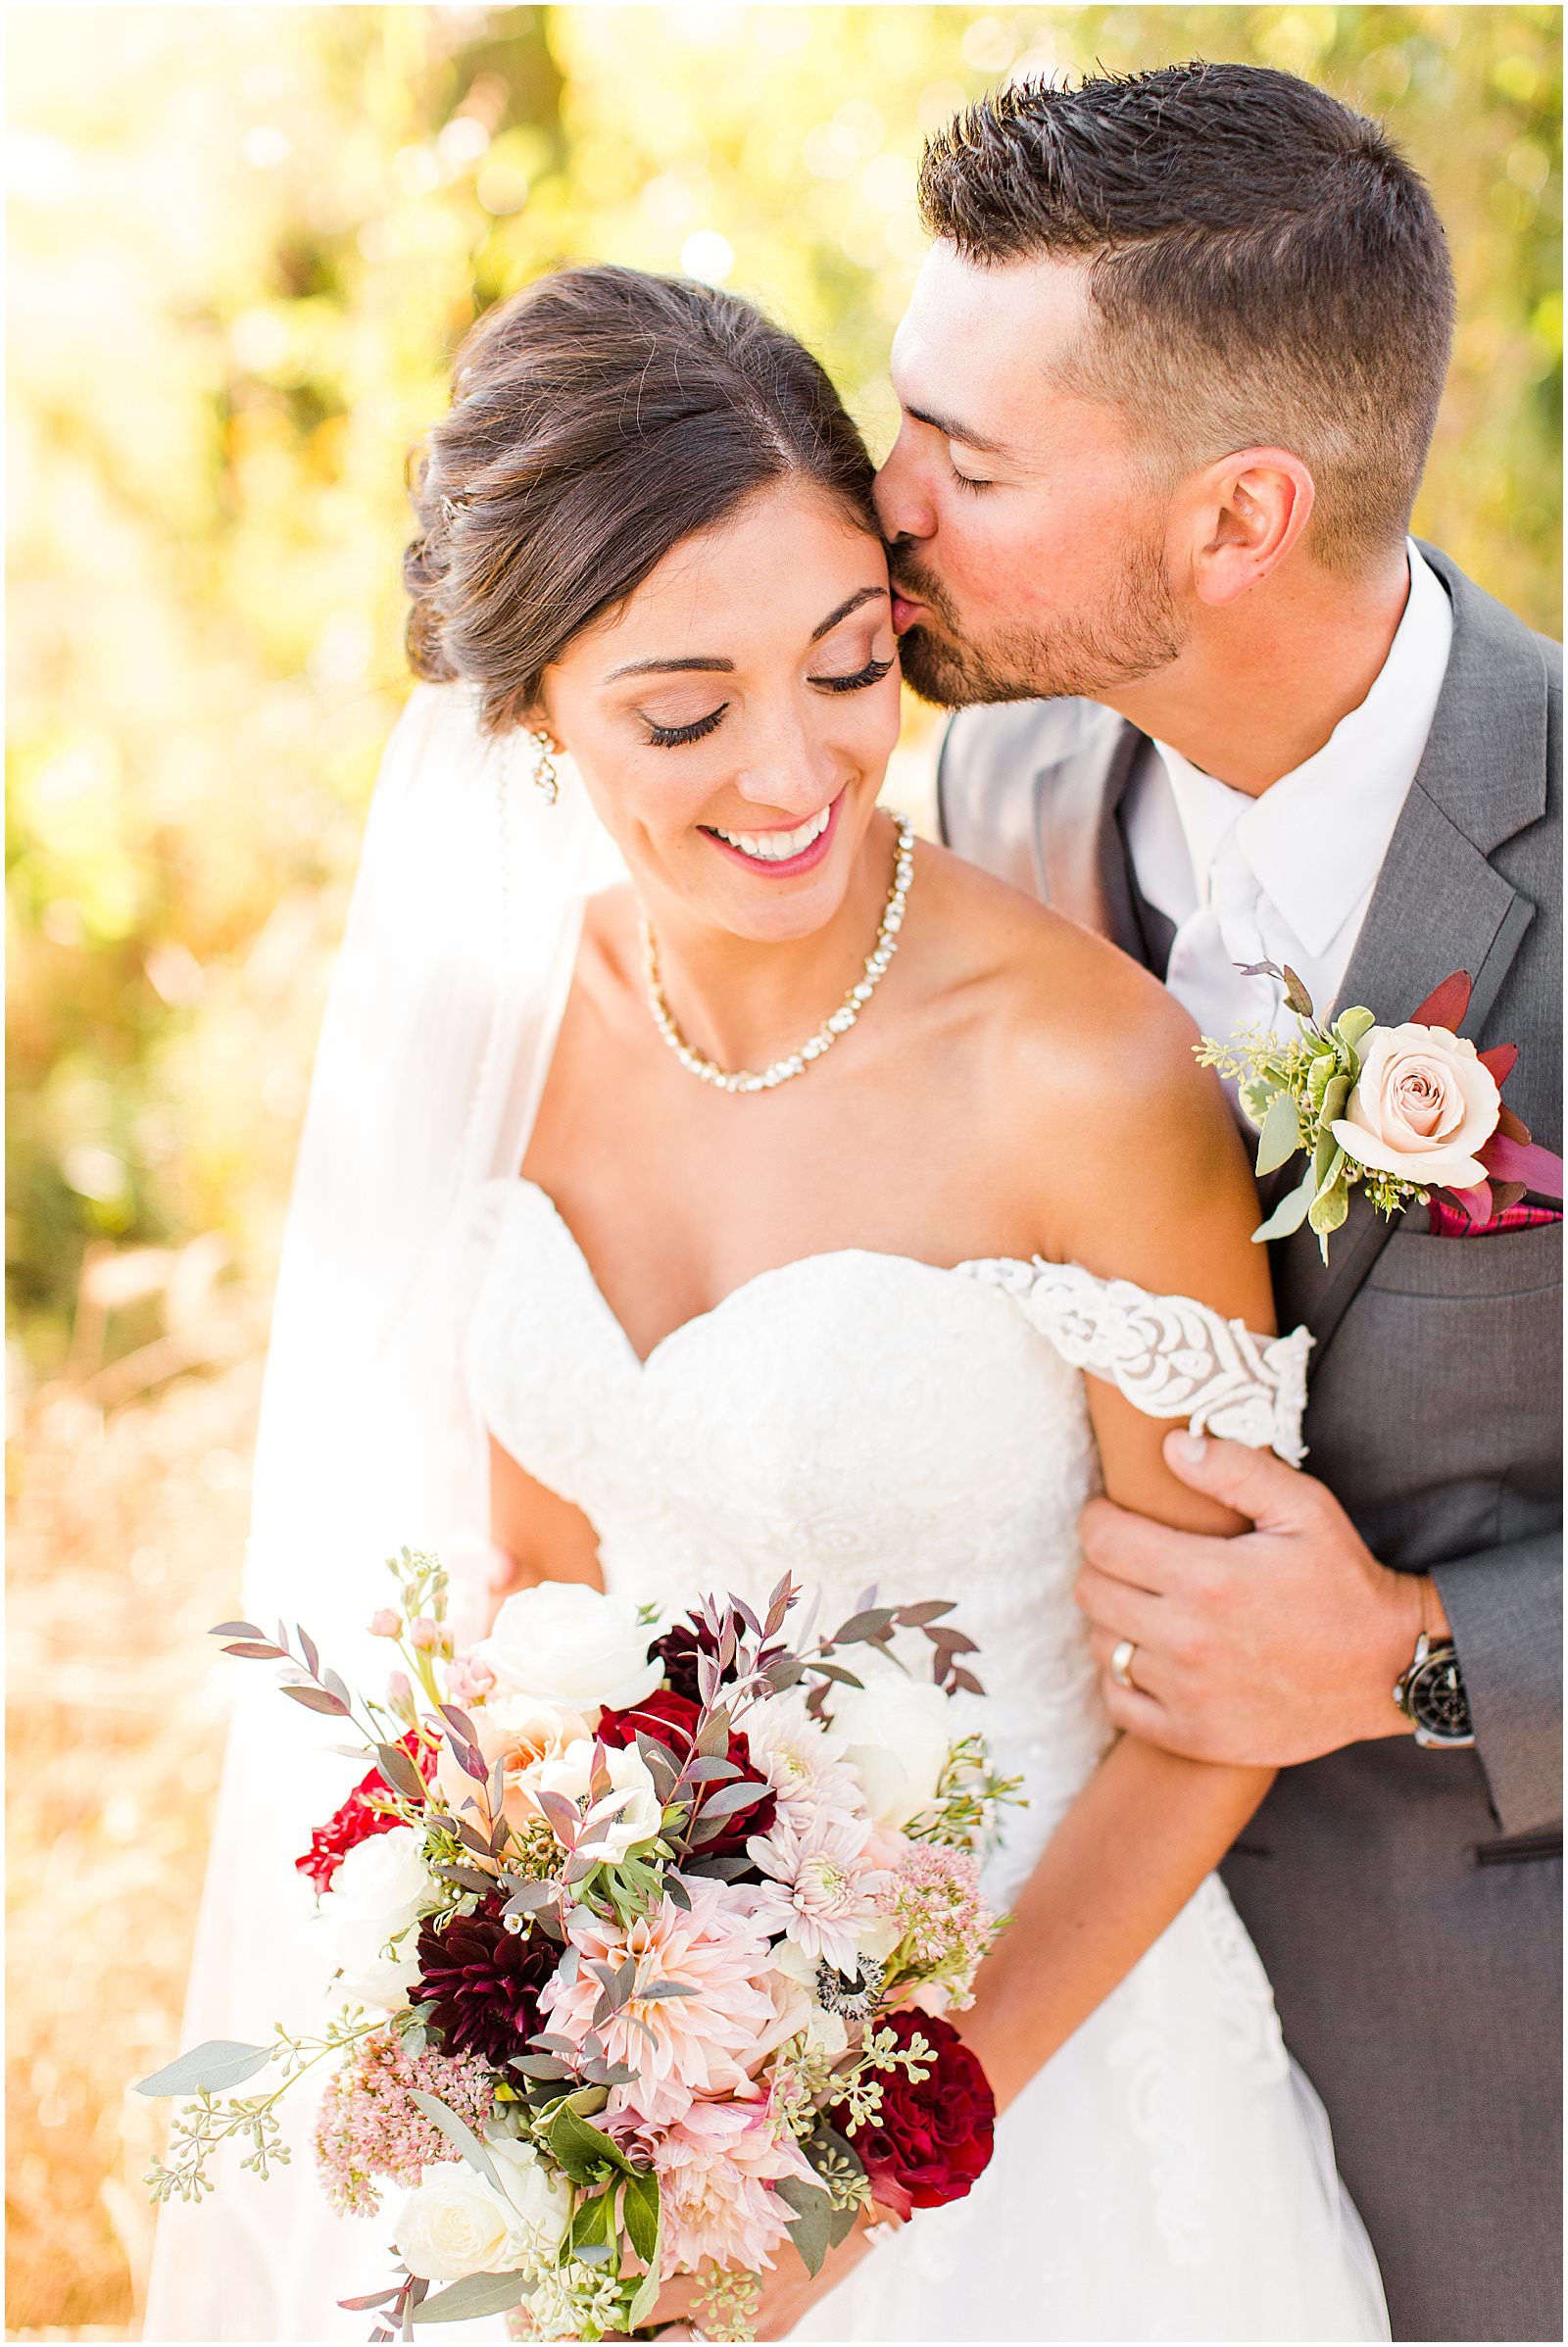 A Stunning Fall Wedding in Indianapolis, IN |. Sally and Andrew | Bret and Brandie Photography 0122.jpg